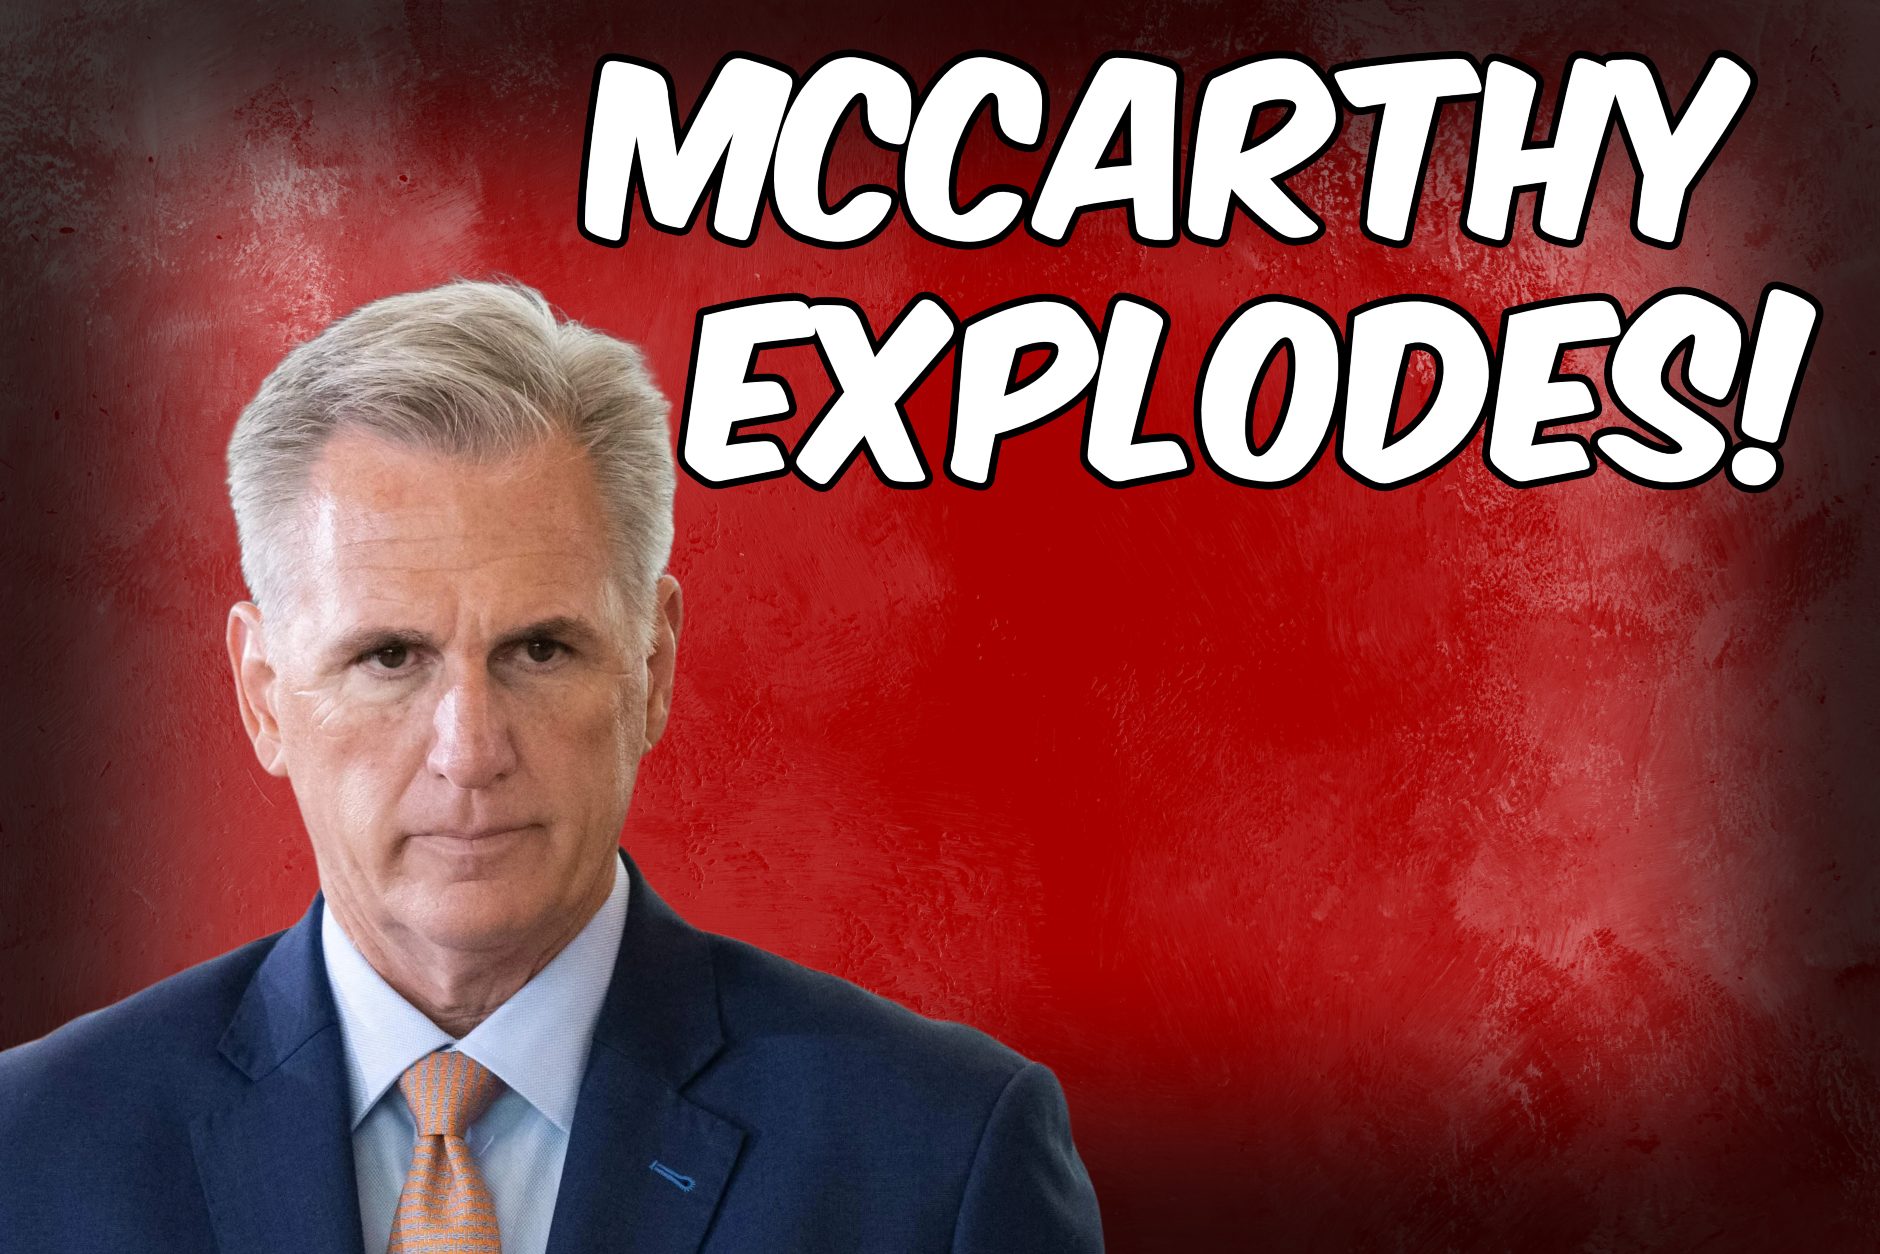 Fireworks in the GOP: McCarthy Unleashes Profanity-Laced Outburst Amid Removal Threats